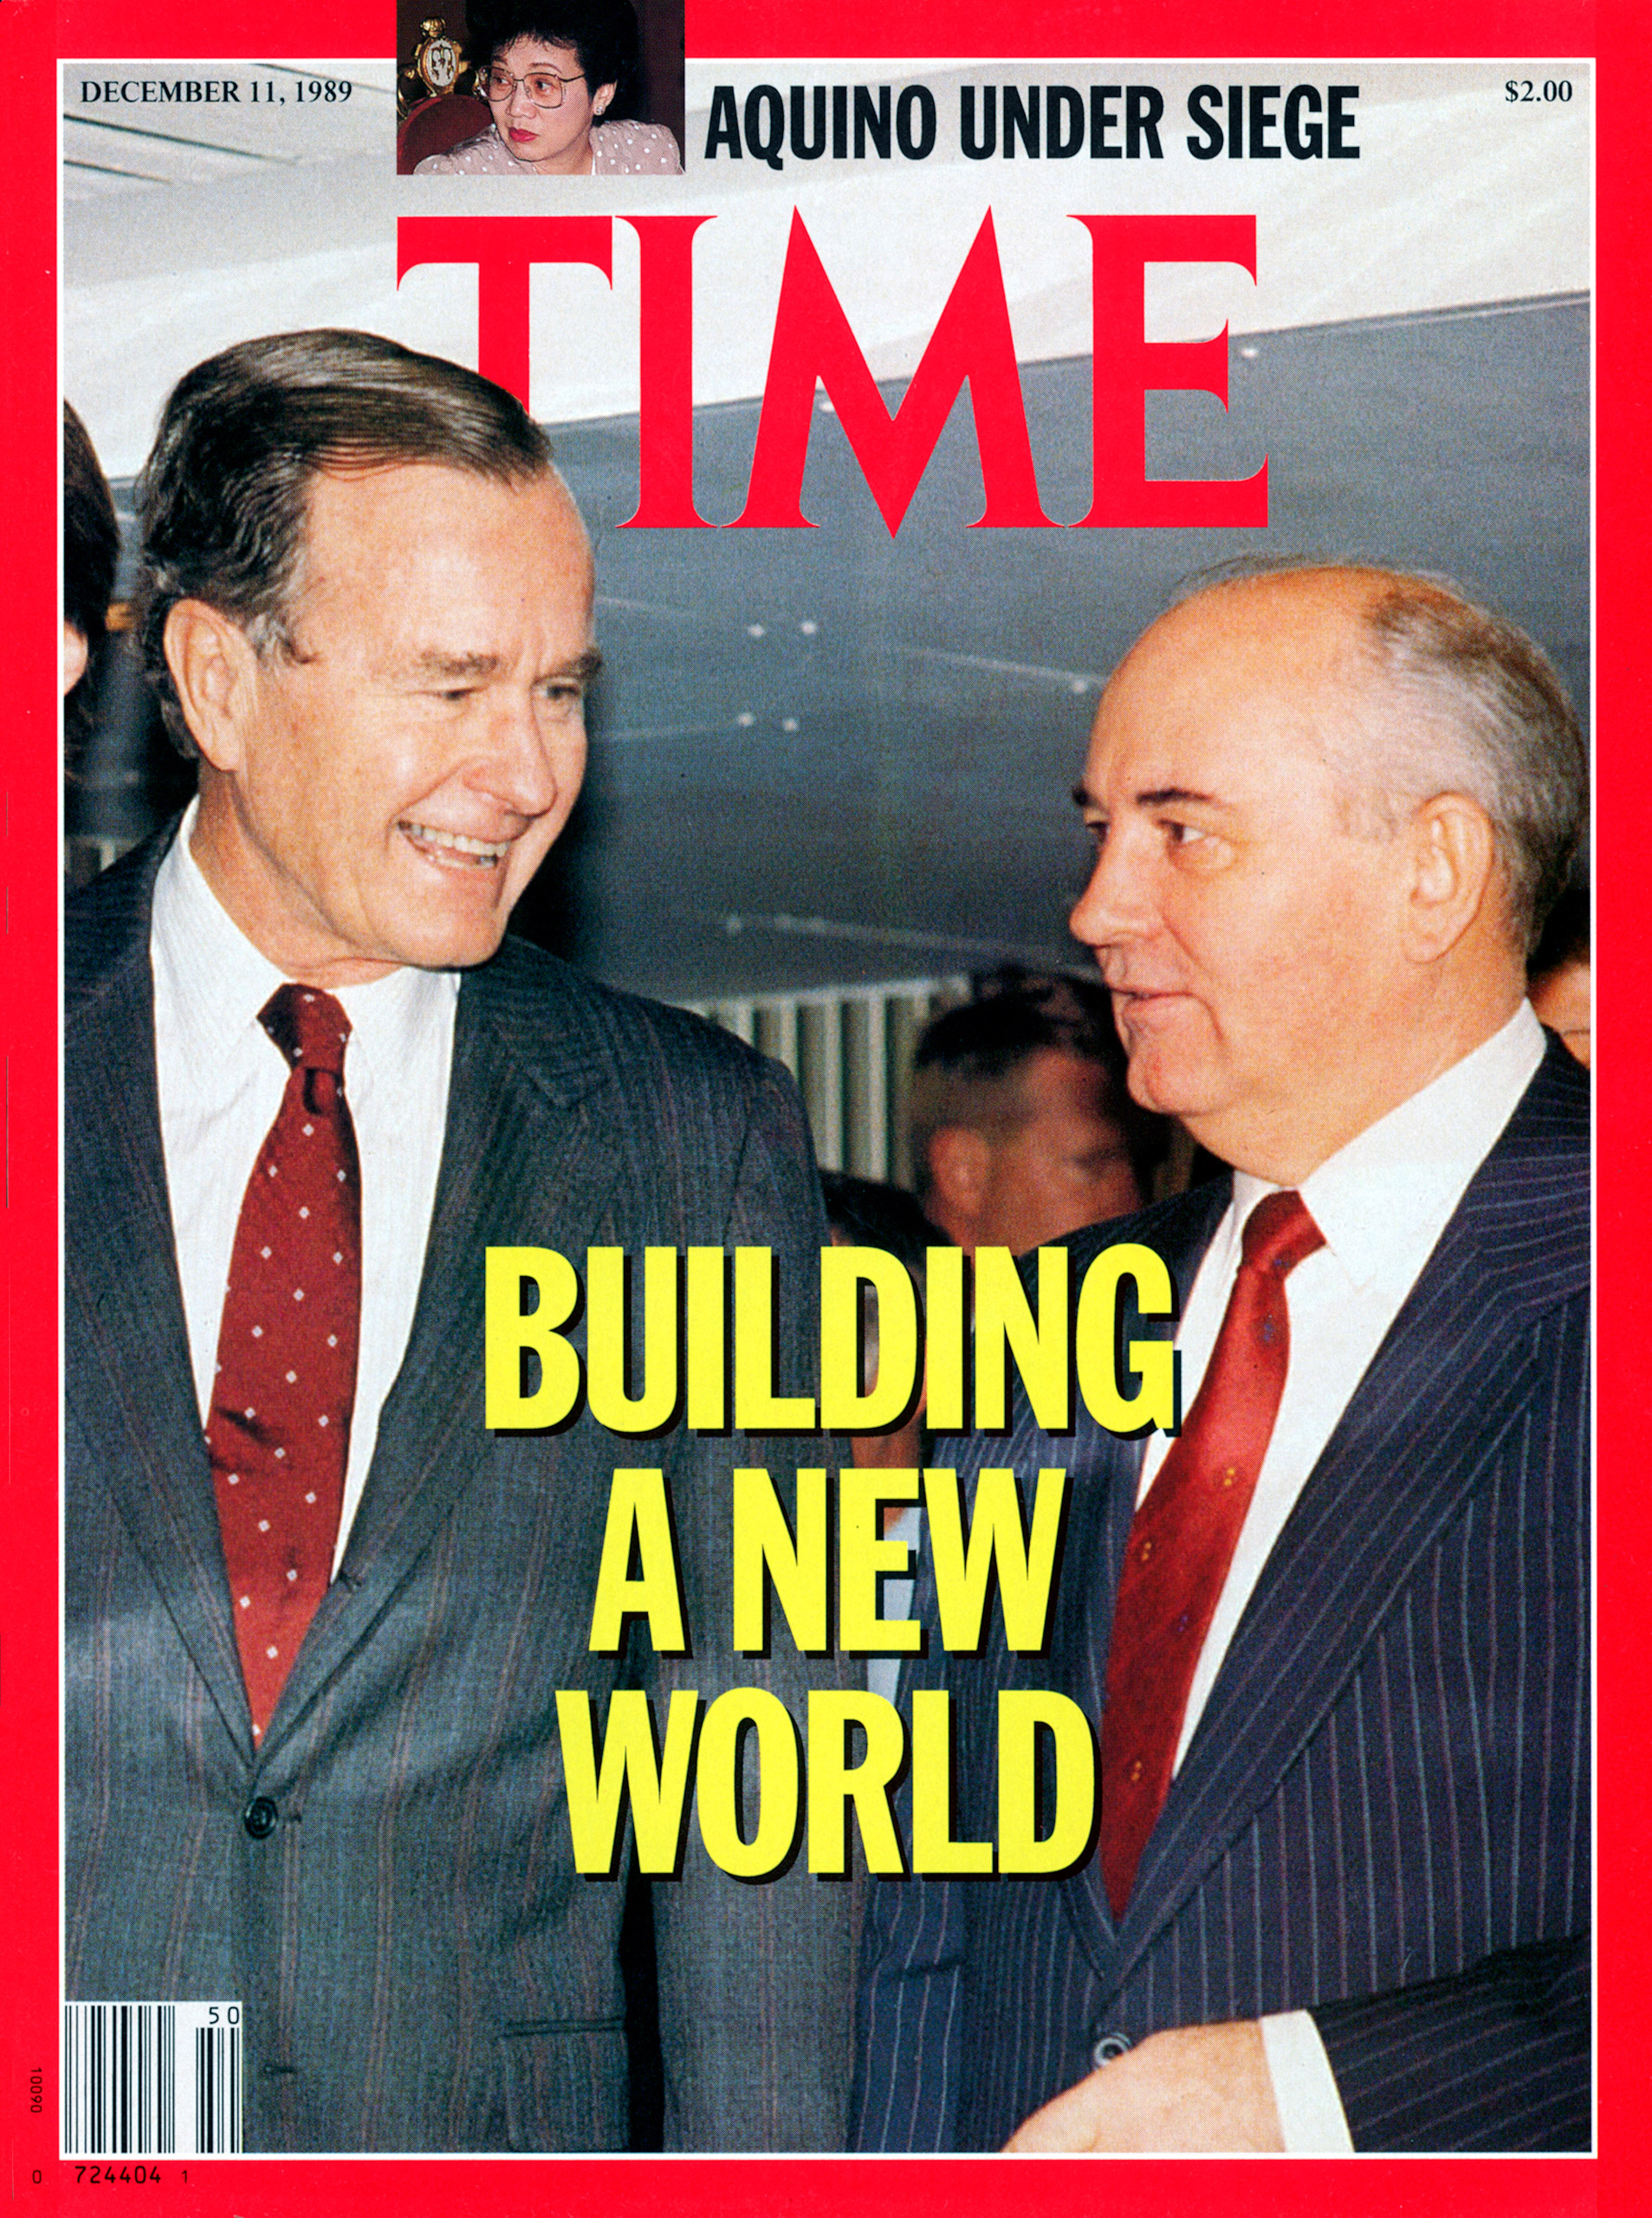 George H.W. Bush and Mikhail Gorbachev on the Dec. 11, 1989, cover of TIME. Cover photo by Diana Walker.